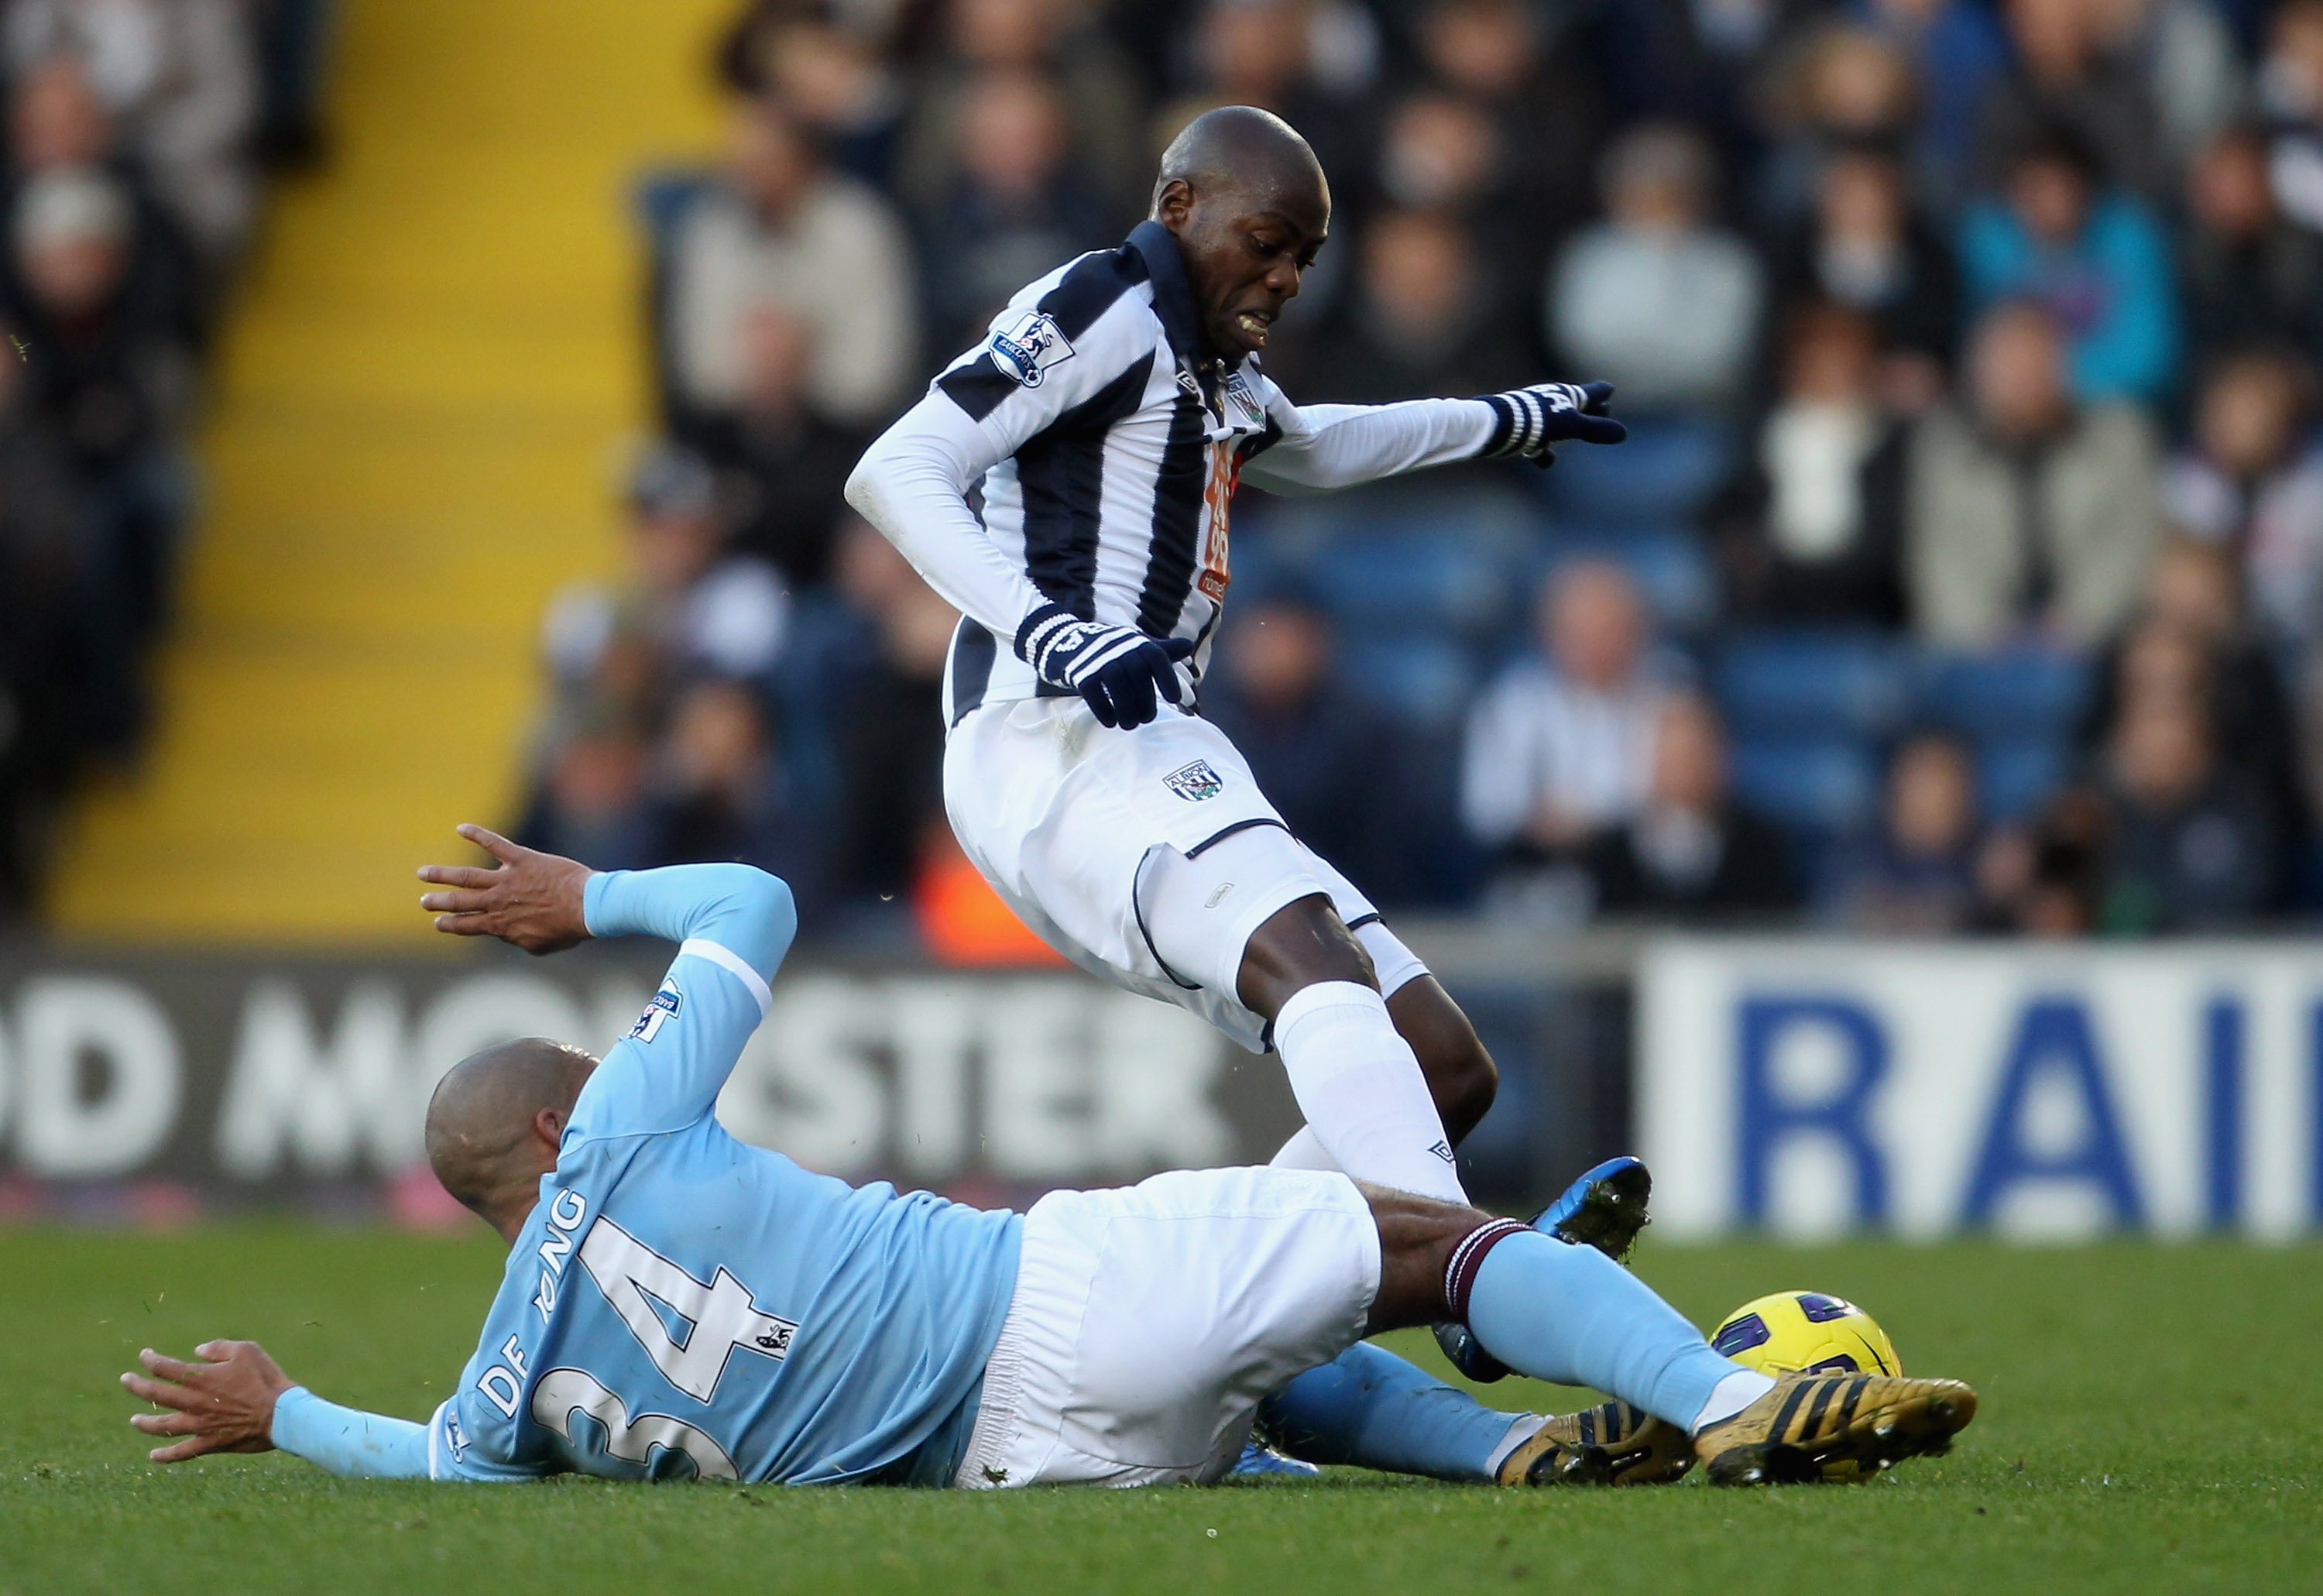 WEST BROMWICH, ENGLAND - NOVEMBER 07: Youssouf Mulumbu of West Bromwich Albion (R) tackles Manchester City's Nigel De Jong during the Barclays Premier League match between West Bromwich Albion and Manchester City at The Hawthorns on November 7, 2010 in We